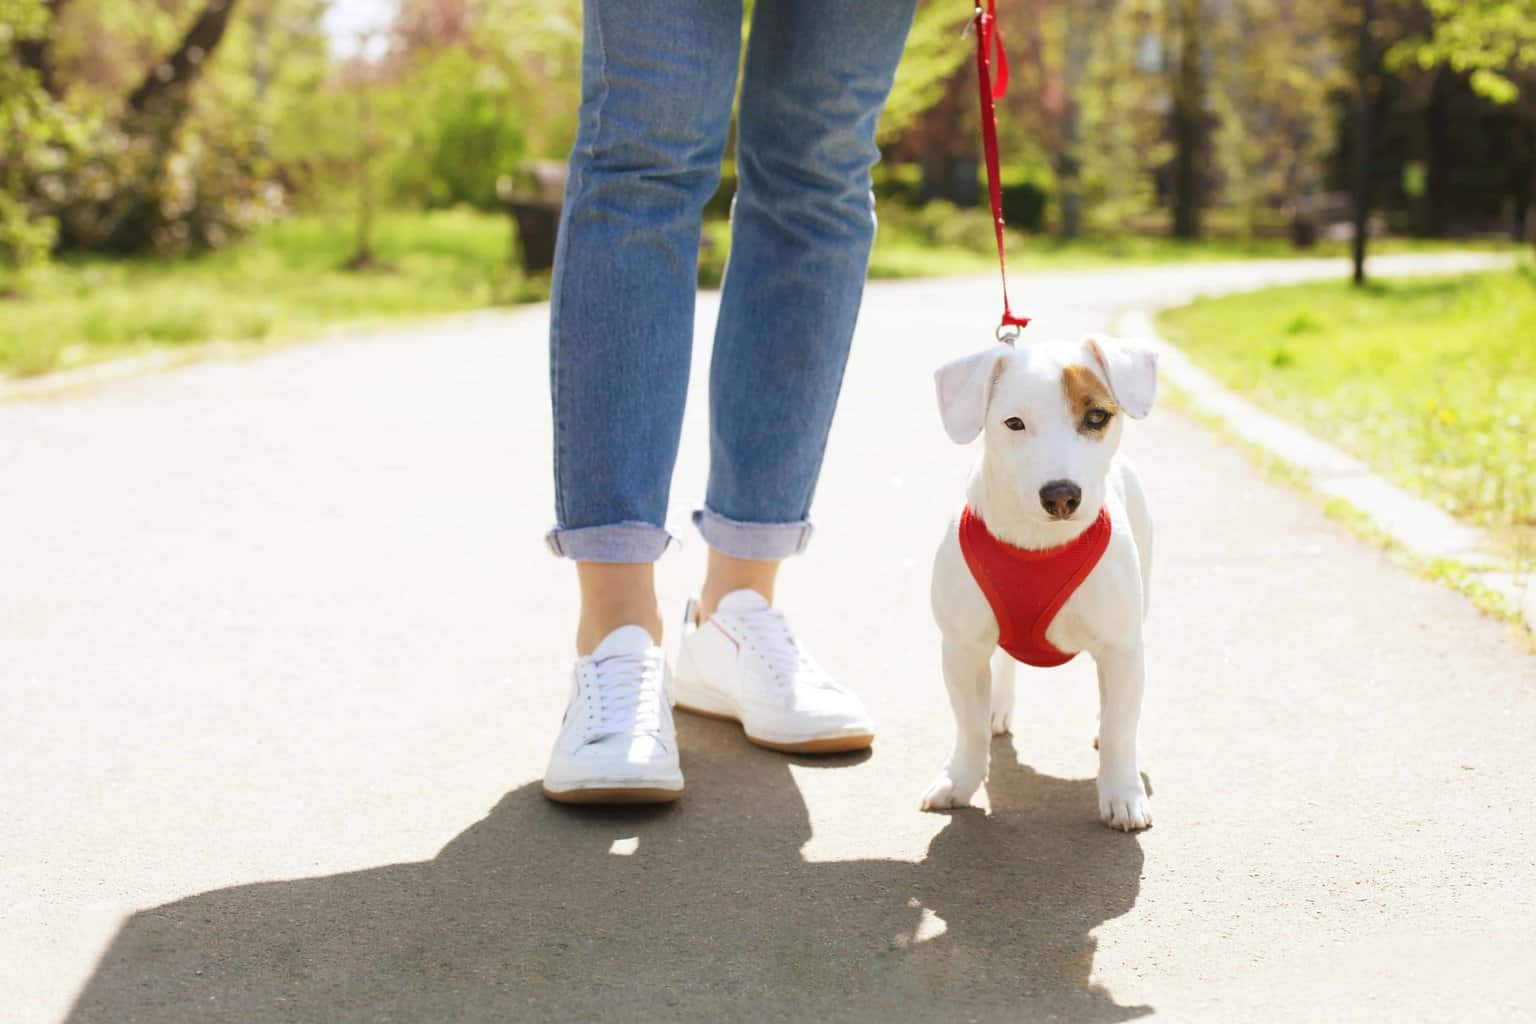 Jack Russell Terrier goes for a walk.